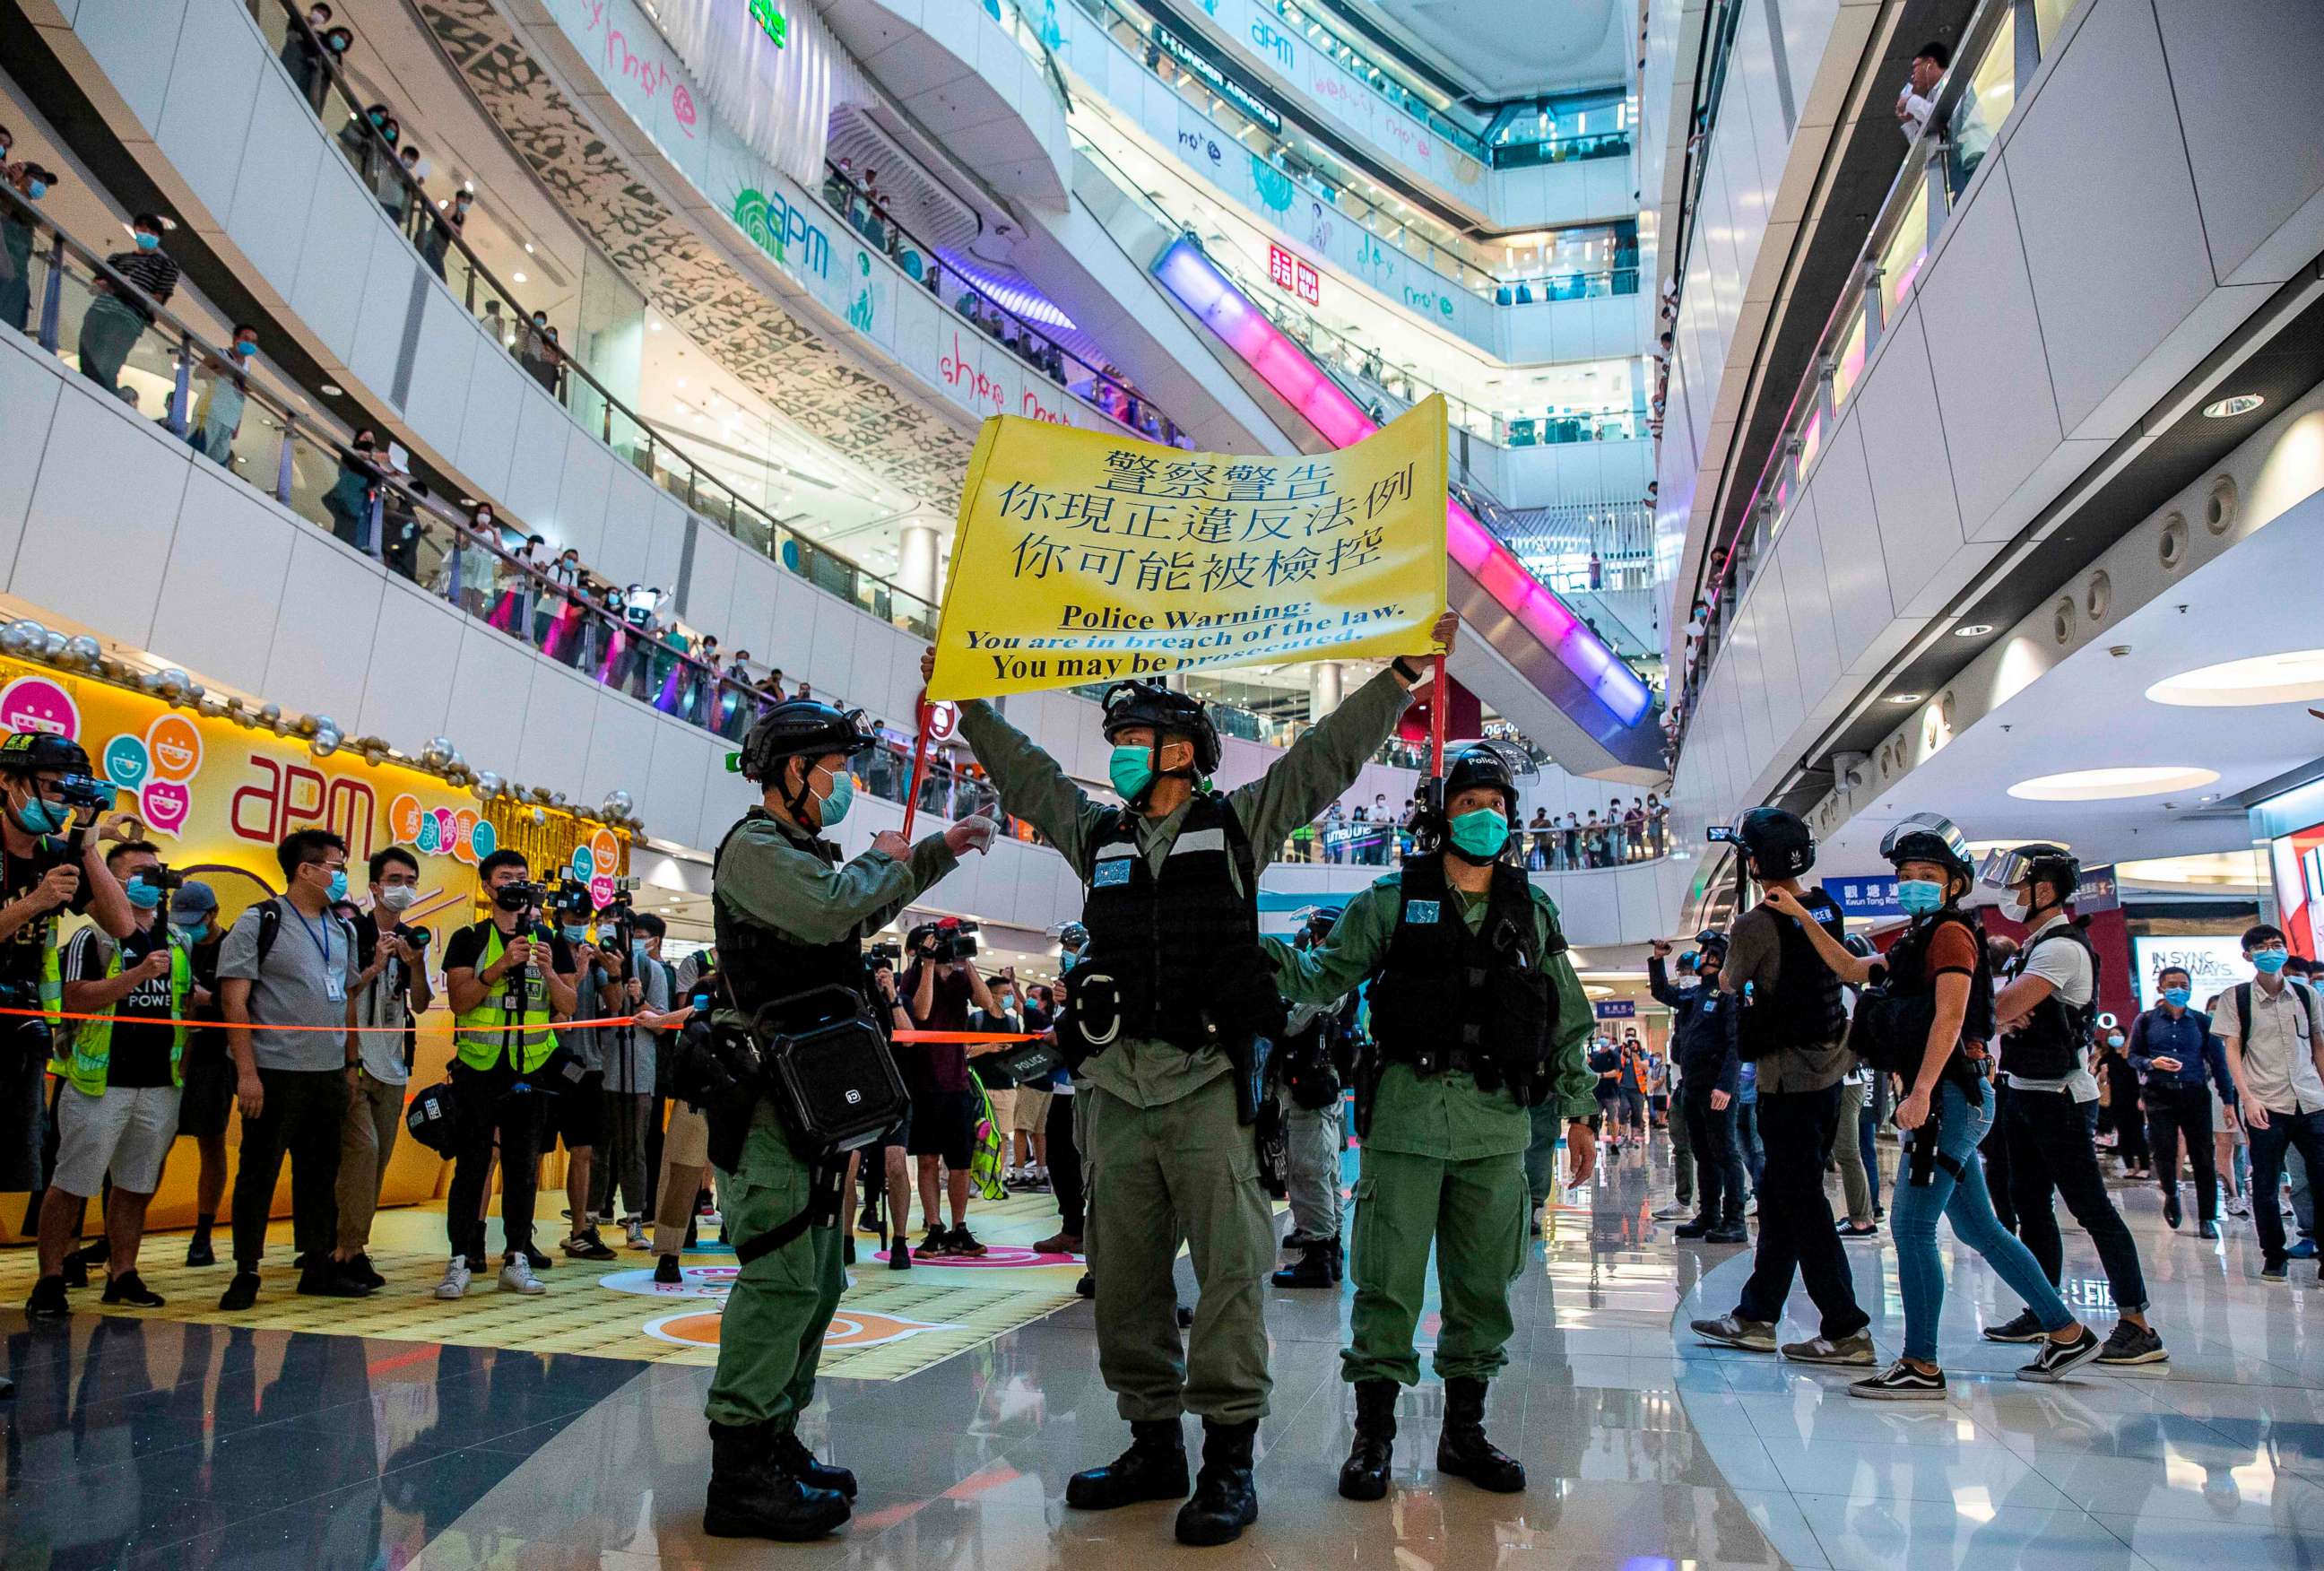 PHOTO: Riot police hold up a warning flag during a demonstration in a mall in Hong Kong on July 6, 2020, in response to a new national security law.